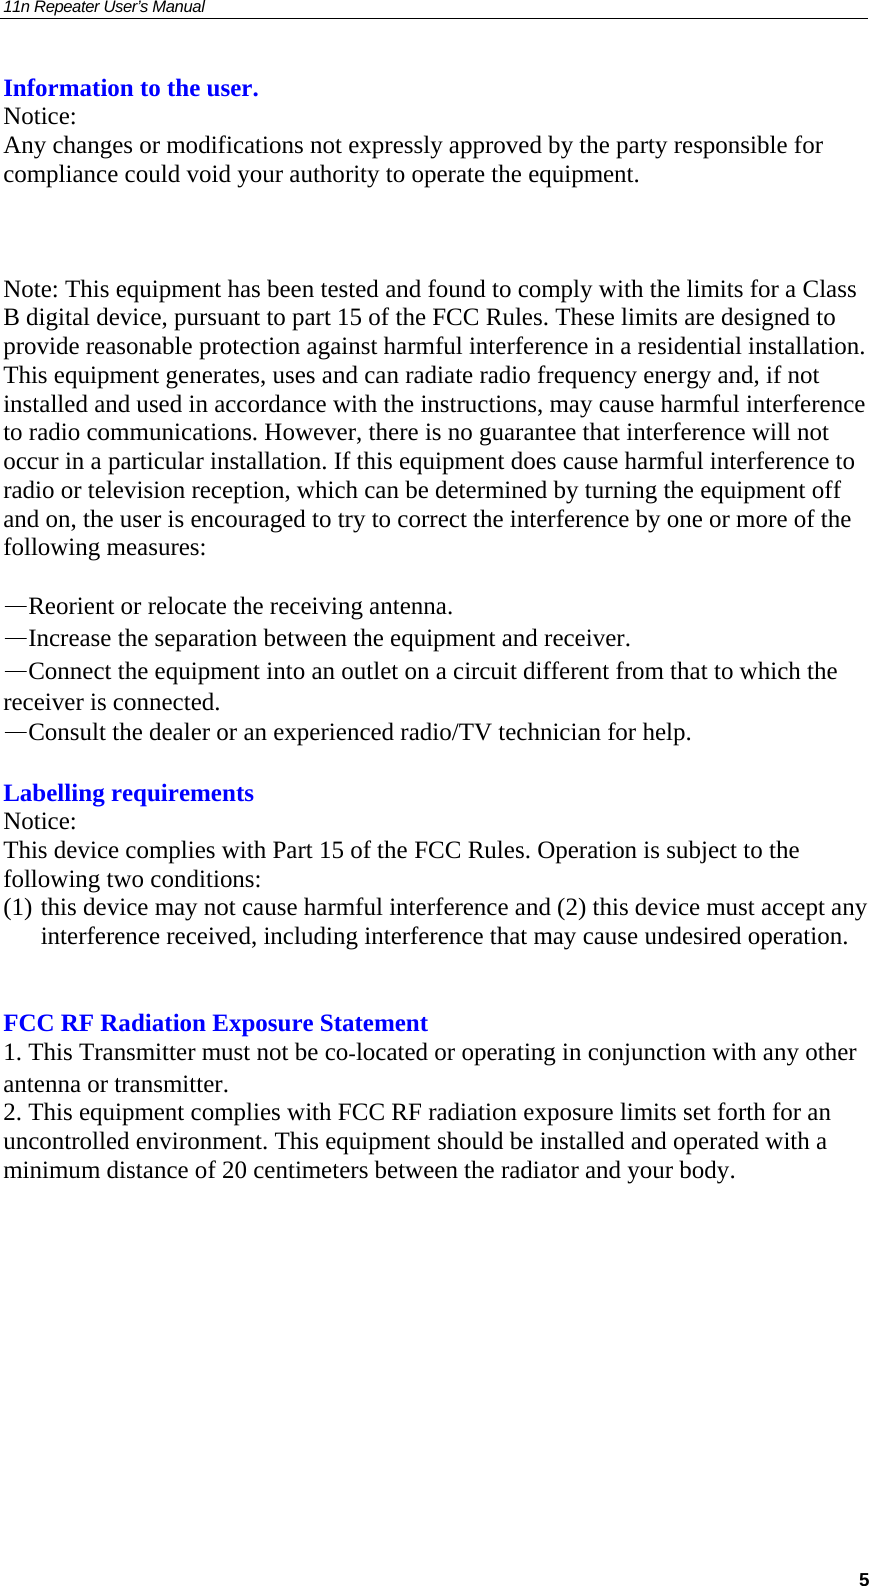 11n Repeater User’s Manual     5Information to the user. Notice: Any changes or modifications not expressly approved by the party responsible for compliance could void your authority to operate the equipment.    Note: This equipment has been tested and found to comply with the limits for a Class B digital device, pursuant to part 15 of the FCC Rules. These limits are designed to provide reasonable protection against harmful interference in a residential installation. This equipment generates, uses and can radiate radio frequency energy and, if not installed and used in accordance with the instructions, may cause harmful interference to radio communications. However, there is no guarantee that interference will not occur in a particular installation. If this equipment does cause harmful interference to radio or television reception, which can be determined by turning the equipment off and on, the user is encouraged to try to correct the interference by one or more of the following measures:  —Reorient or relocate the receiving antenna. —Increase the separation between the equipment and receiver. —Connect the equipment into an outlet on a circuit different from that to which the receiver is connected. —Consult the dealer or an experienced radio/TV technician for help.  Labelling requirements Notice: This device complies with Part 15 of the FCC Rules. Operation is subject to the following two conditions:  (1) this device may not cause harmful interference and (2) this device must accept any interference received, including interference that may cause undesired operation.   FCC RF Radiation Exposure Statement 1. This Transmitter must not be colocated or operating in conjunction with any other antenna or transmitter. 2. This equipment complies with FCC RF radiation exposure limits set forth for an uncontrolled environment. This equipment should be installed and operated with a minimum distance of 20 centimeters between the radiator and your body.        